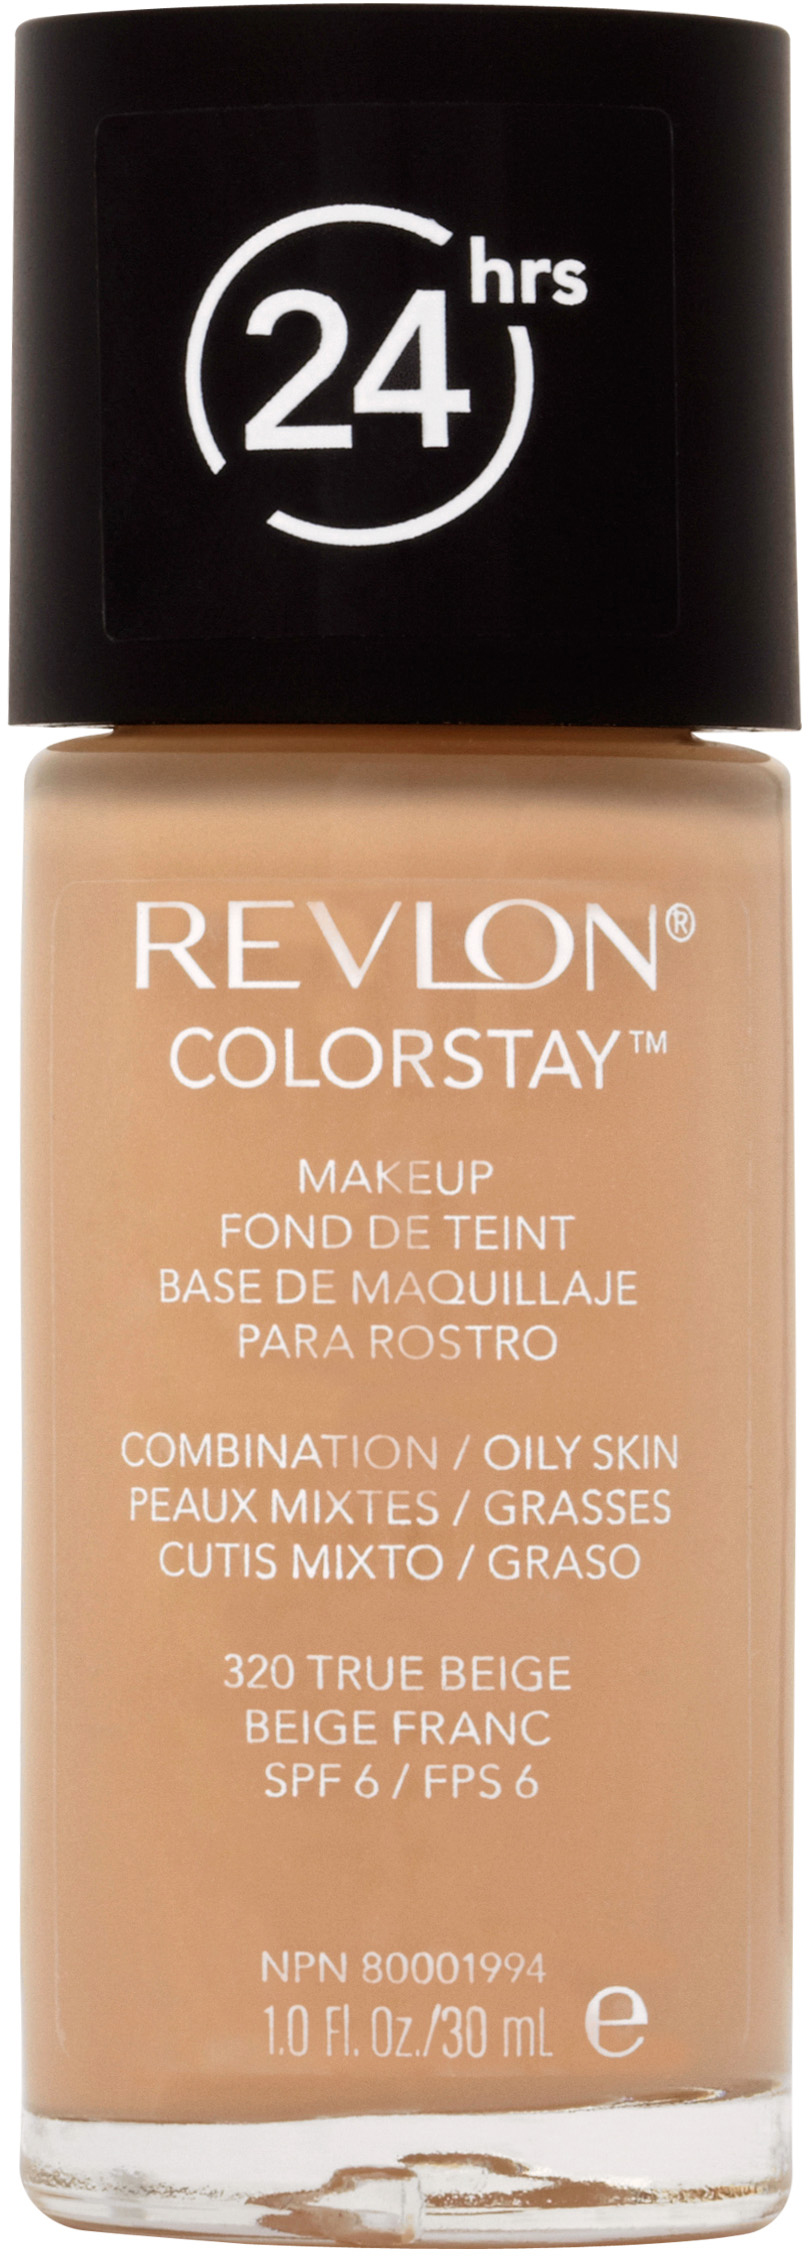 Revlon Cosmetics Colorstay Foundation For Combination/Oily Skin 320